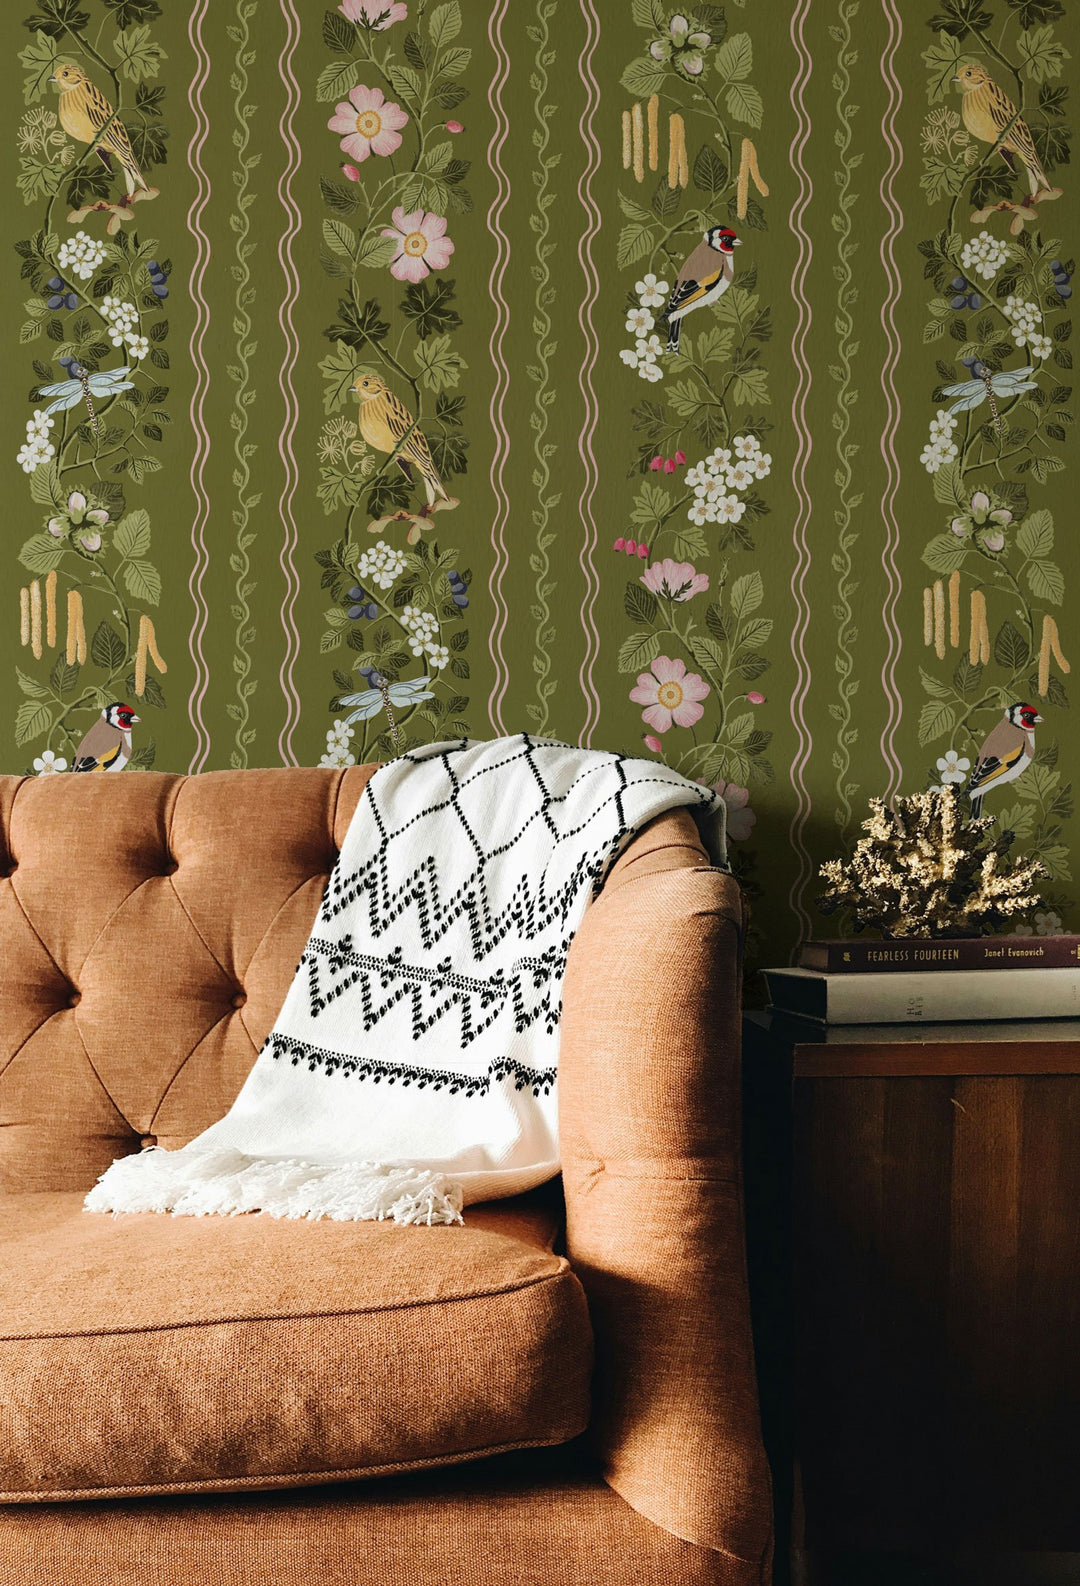 Studio-le-cocq-hedgerows-wallpaper-moss-striped-countrystyle-cottage-wallpaper-birds-roses-vines-leaves